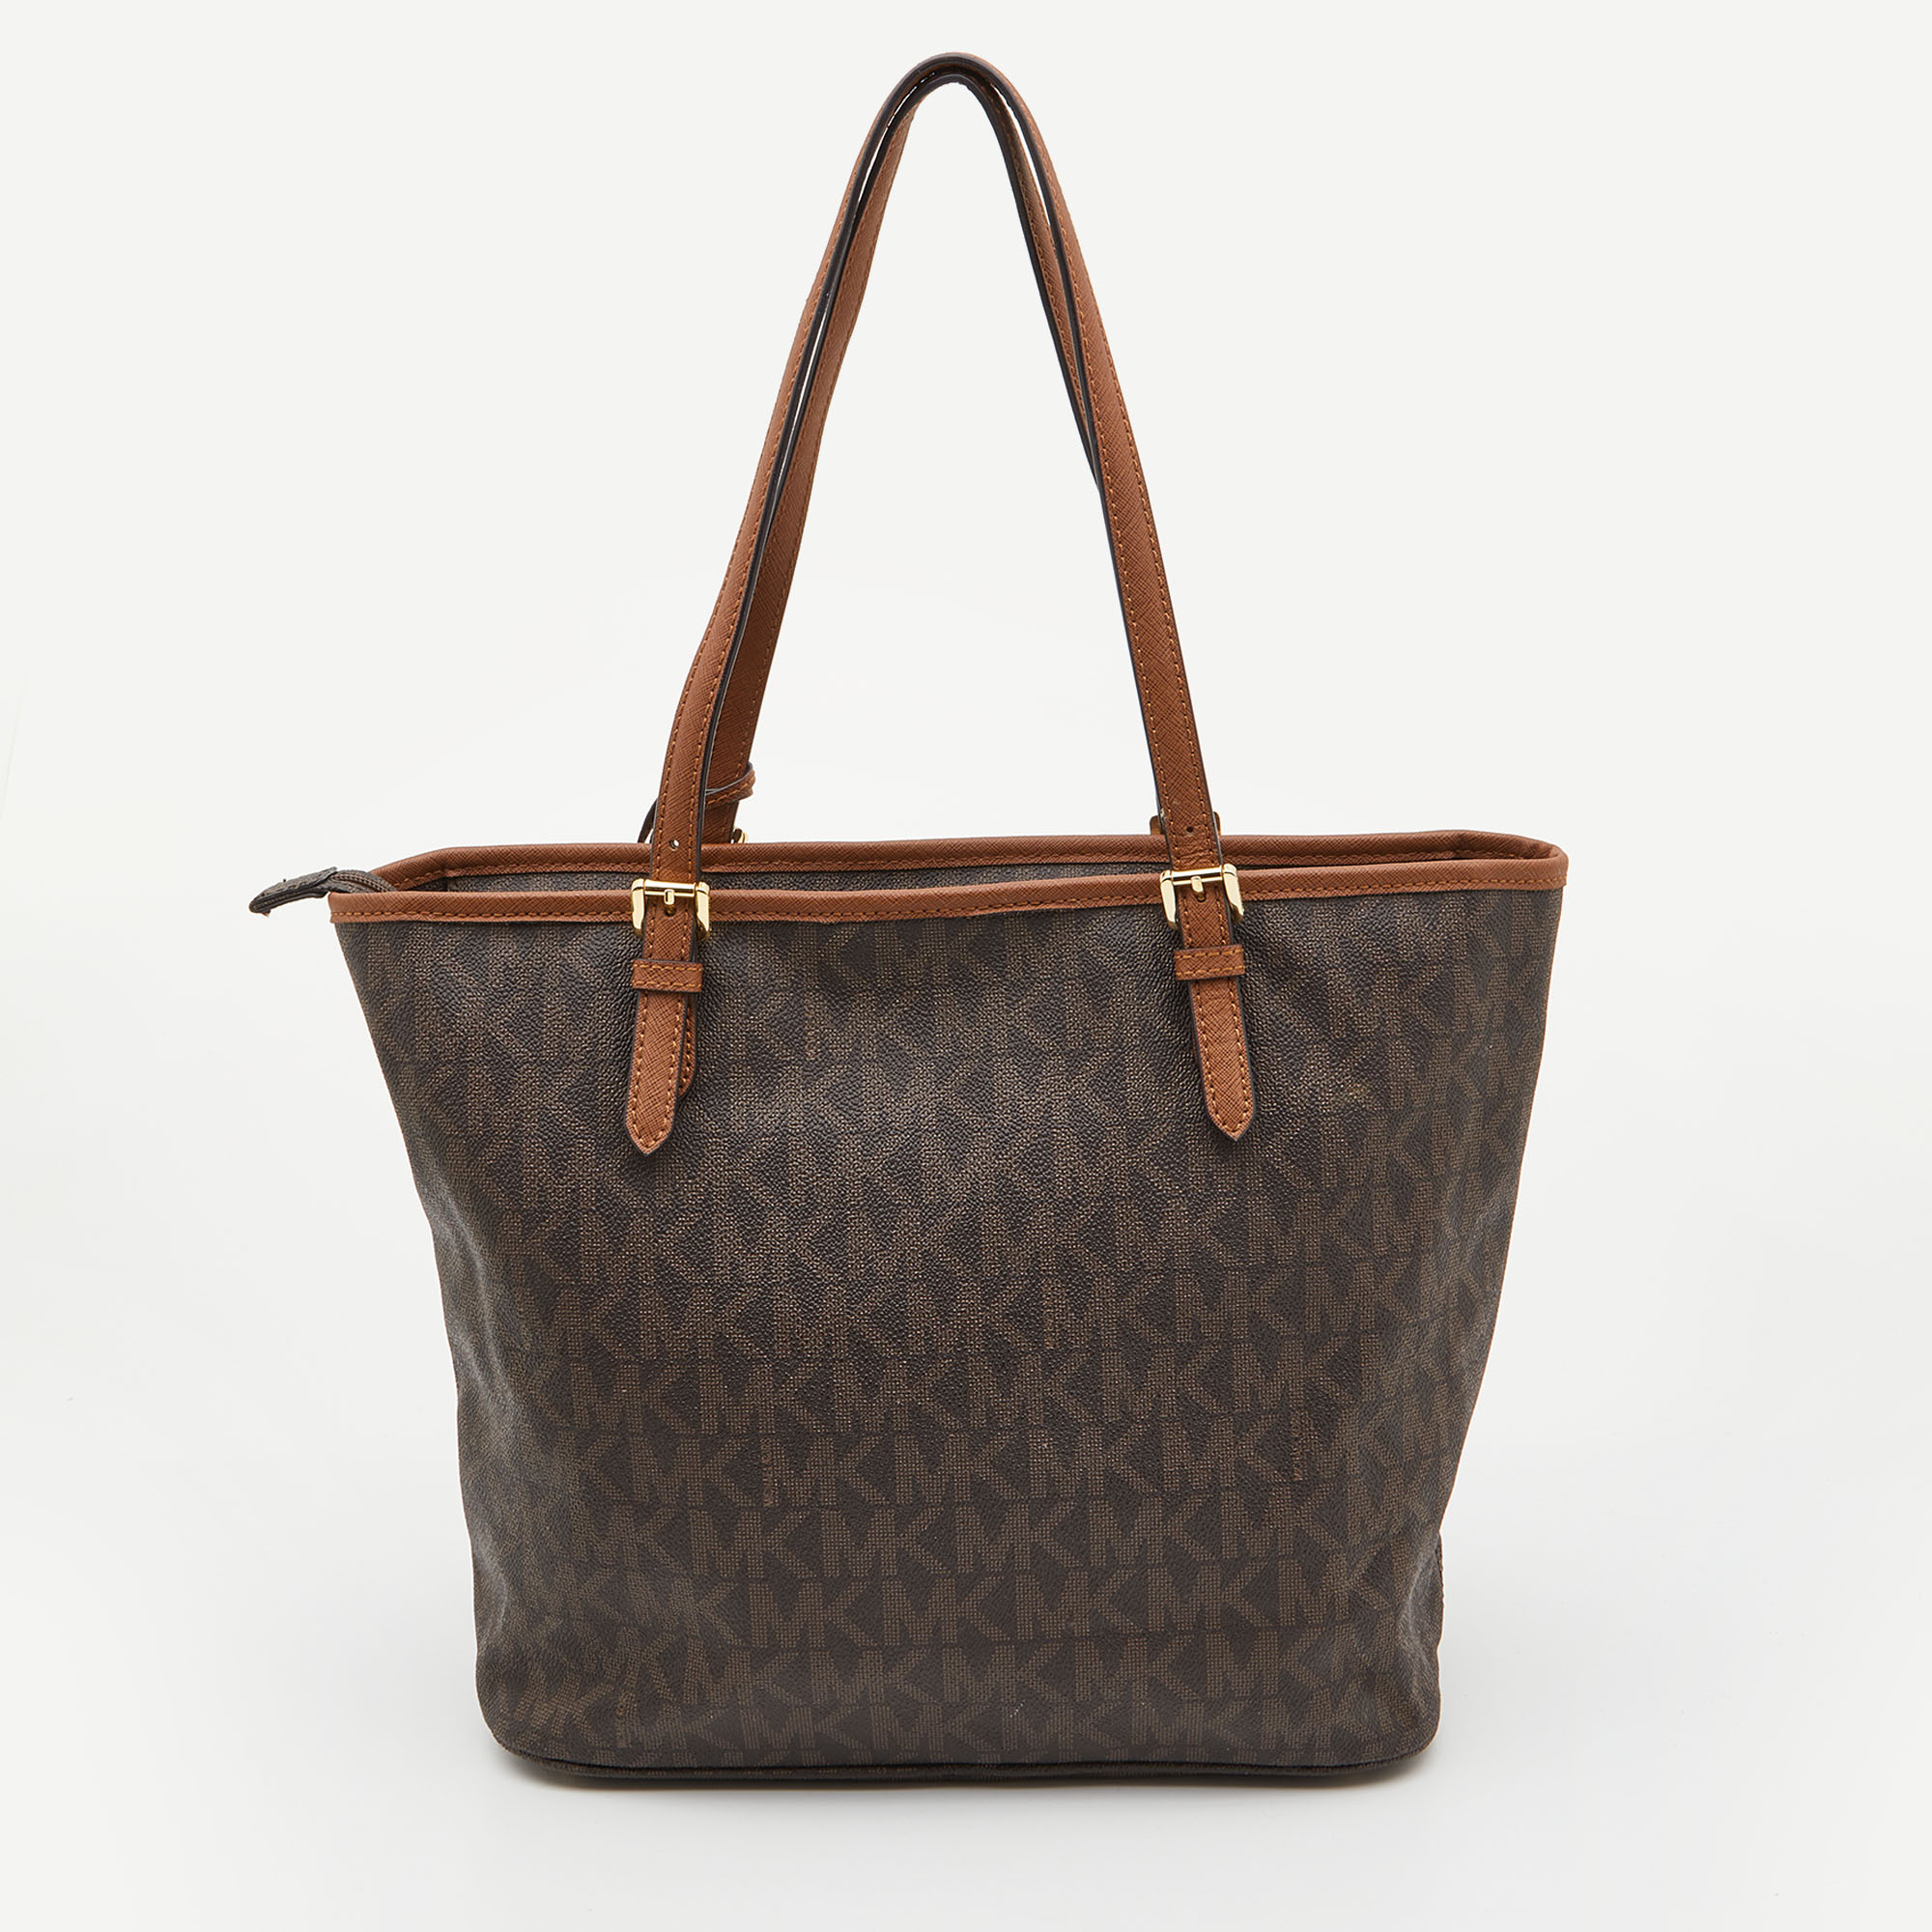 MICHAEL Michael Kors Brown/Tan Signature Coated Canvas And Leather Jet Set Tote